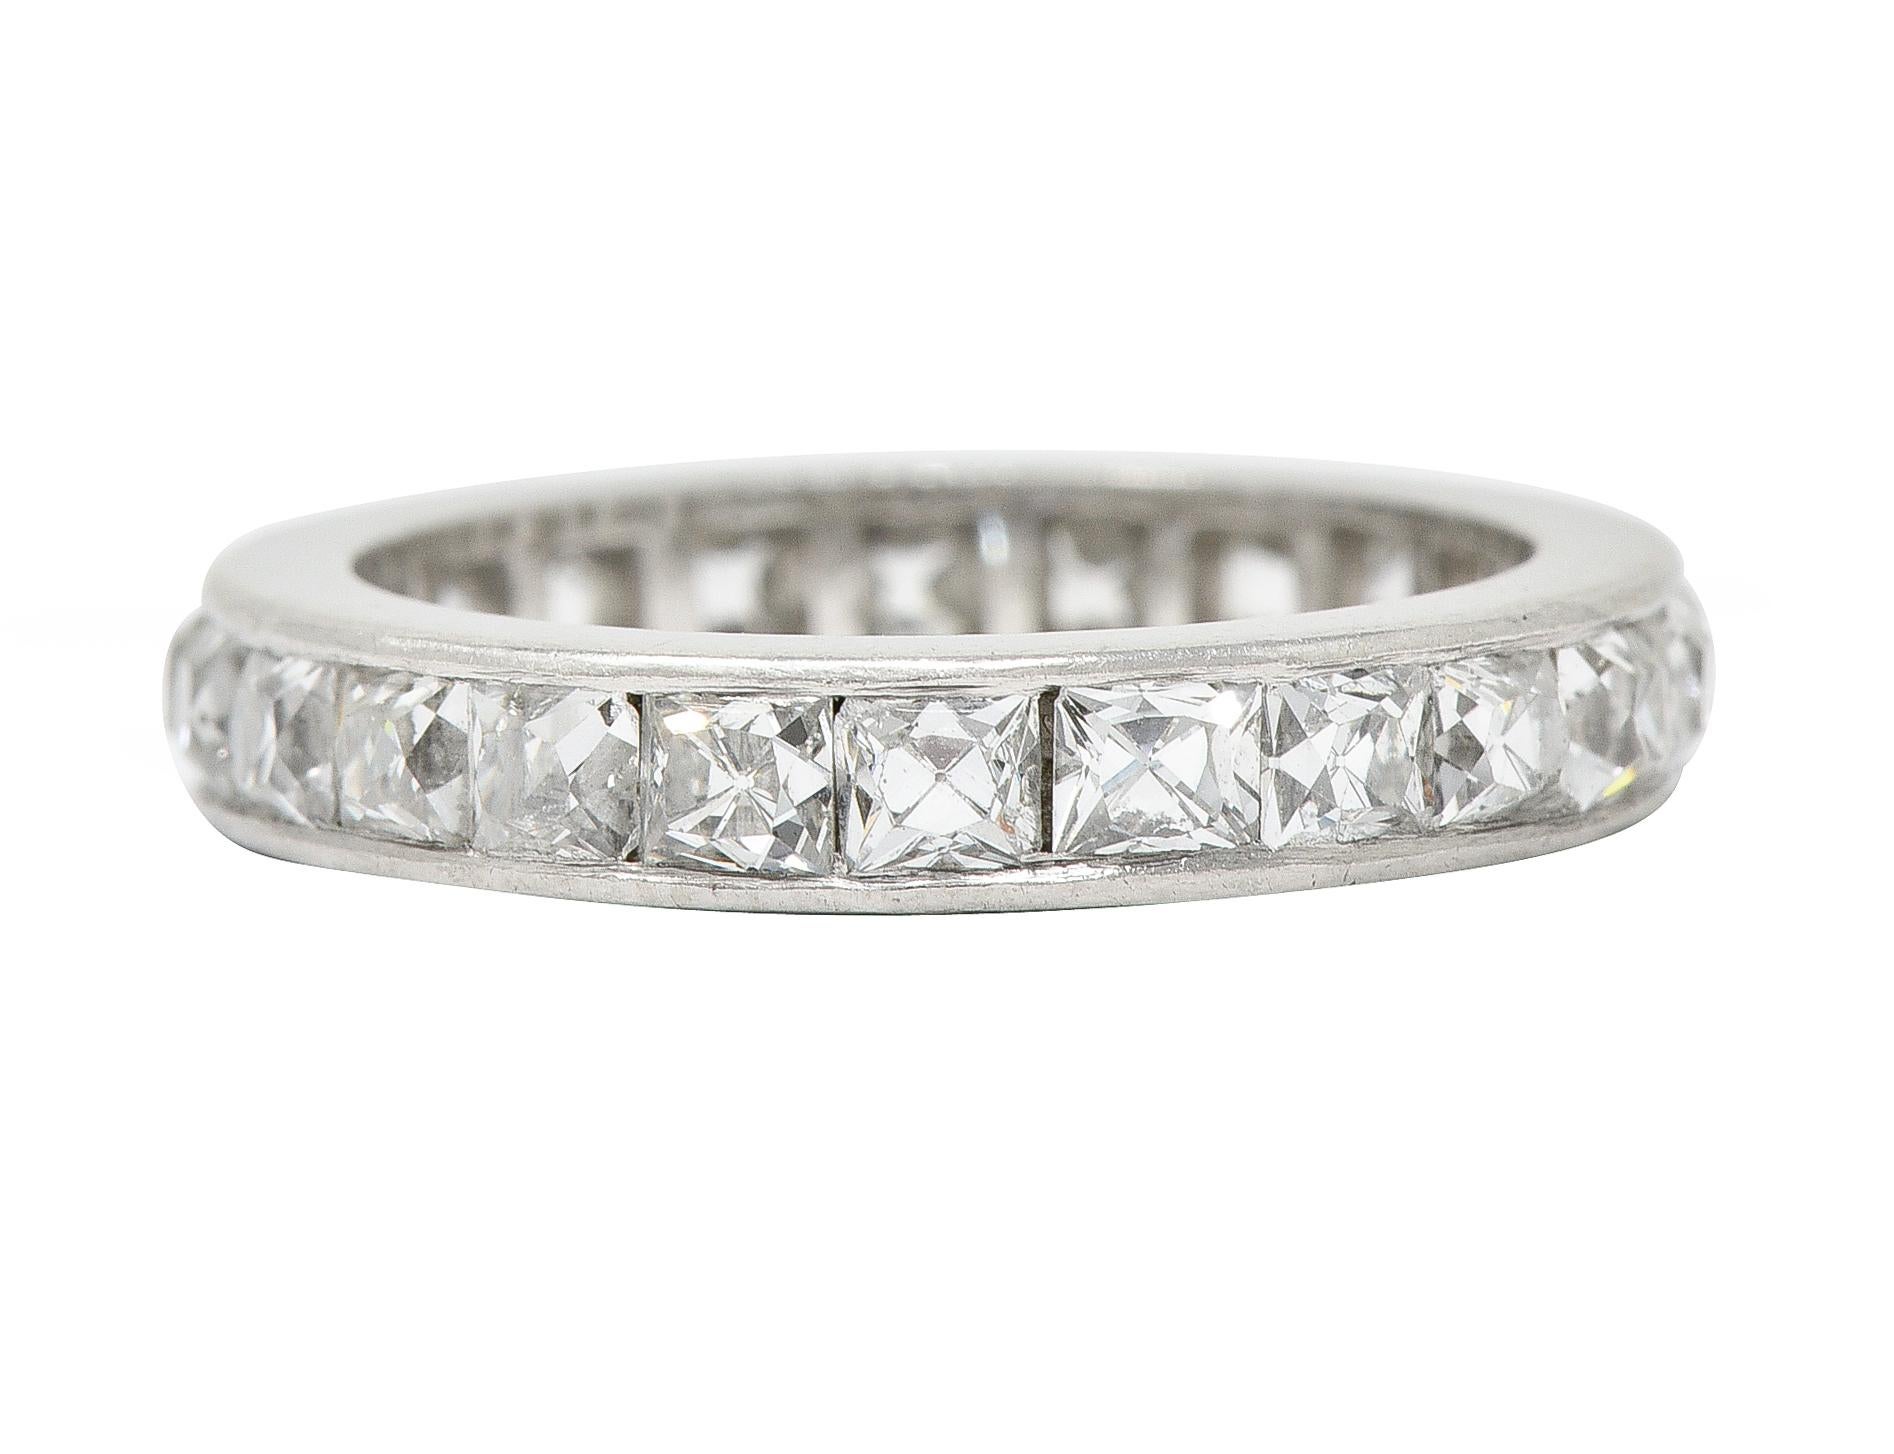 Art Deco 3.52 CTW French Cut Diamond Platinum Band Vintage Wedding Ring In Excellent Condition For Sale In Philadelphia, PA